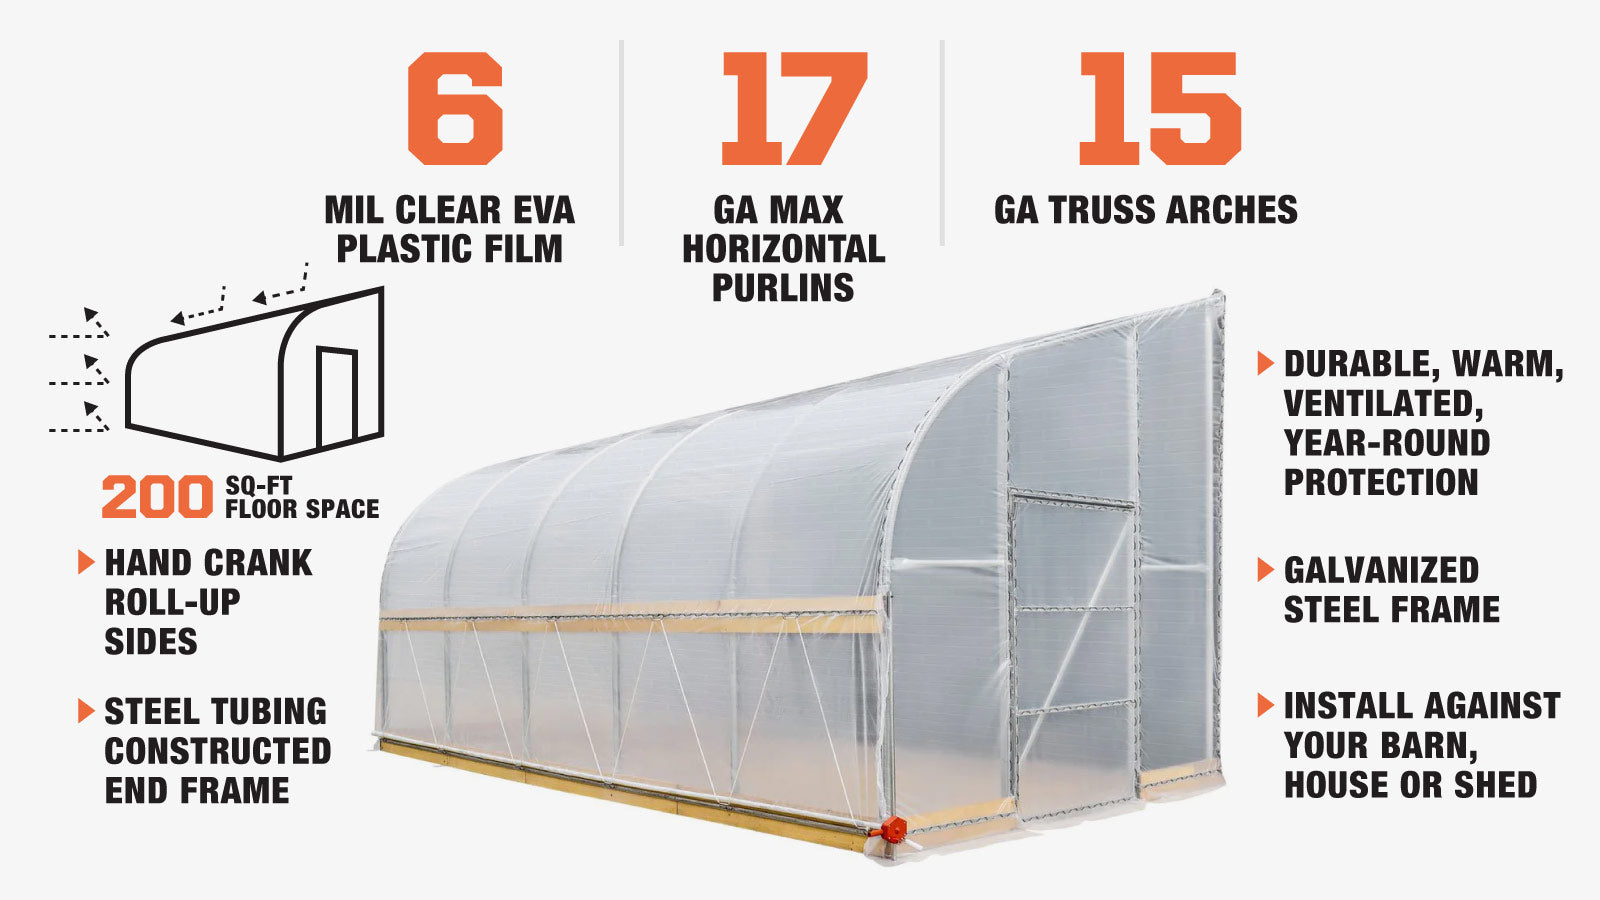 TMG Industrial 10’ x 20’ Lean-To Greenhouse Grow Tent w/6 Mil Clear EVA Plastic Film, Cold Frame, Hand Crank Roll-Up Side, 6-½’ Sidewall, TMG-GHL1020-description-image